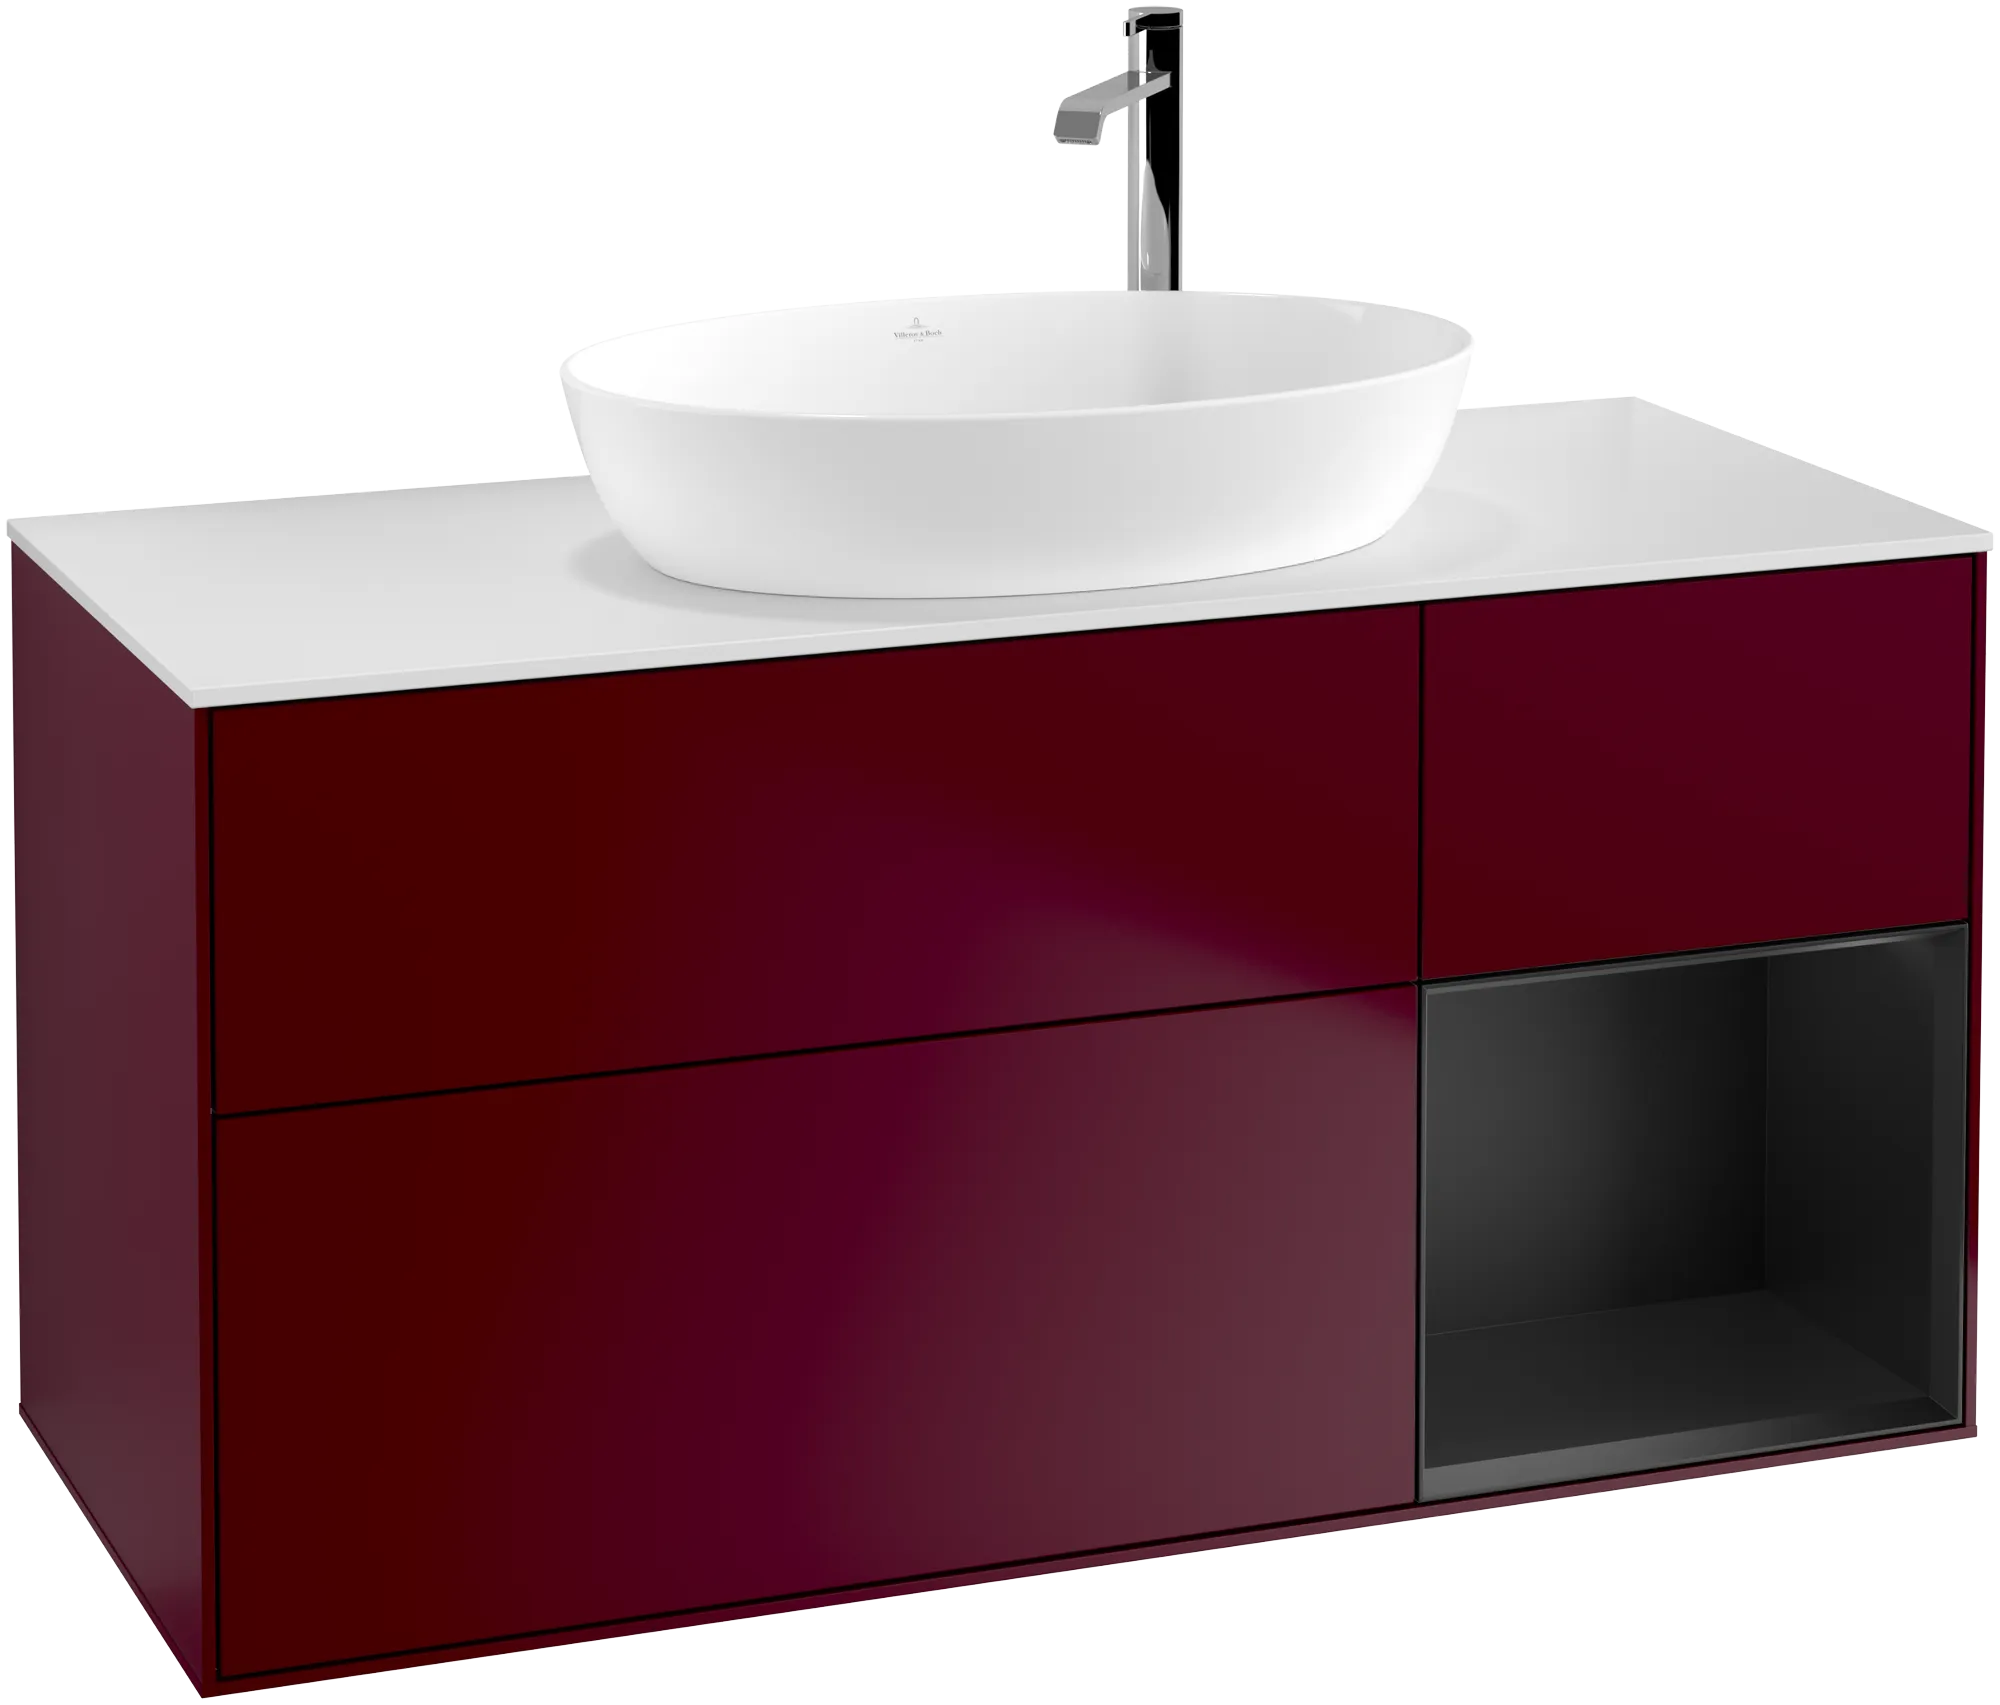 Picture of VILLEROY BOCH Finion Vanity unit, with lighting, 3 pull-out compartments, 1200 x 603 x 501 mm, Peony Matt Lacquer / Black Matt Lacquer / Glass White Matt #G951PDHB